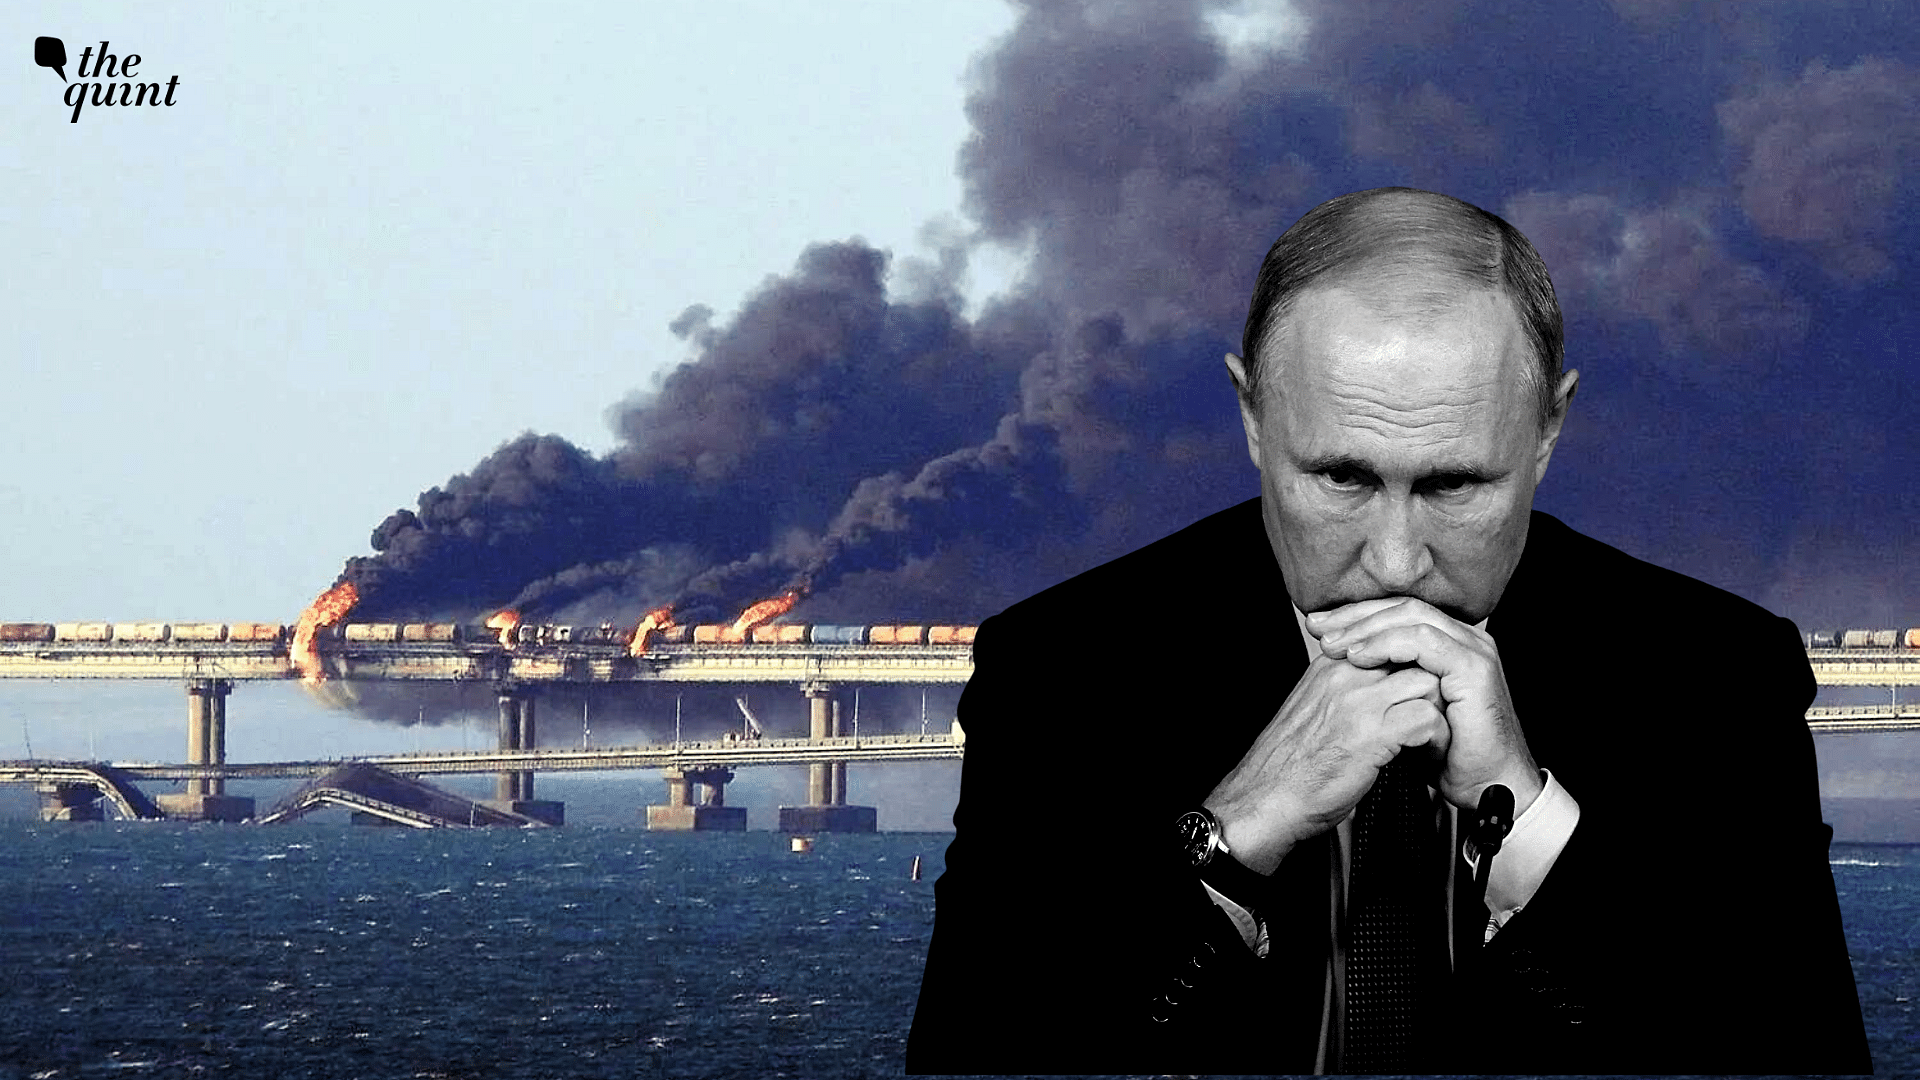 <div class="paragraphs"><p>The 12-mile (19 km) Kerch Strait Bridge linking the <a href="https://www.thequint.com/news/world/ukraine-hits-russian-supply-lines-explosive-attack-crimea-military-base">Crimean Peninsula</a> to Russian mainland was badly damaged by an explosion on Saturday, 8 October.&nbsp;</p></div>